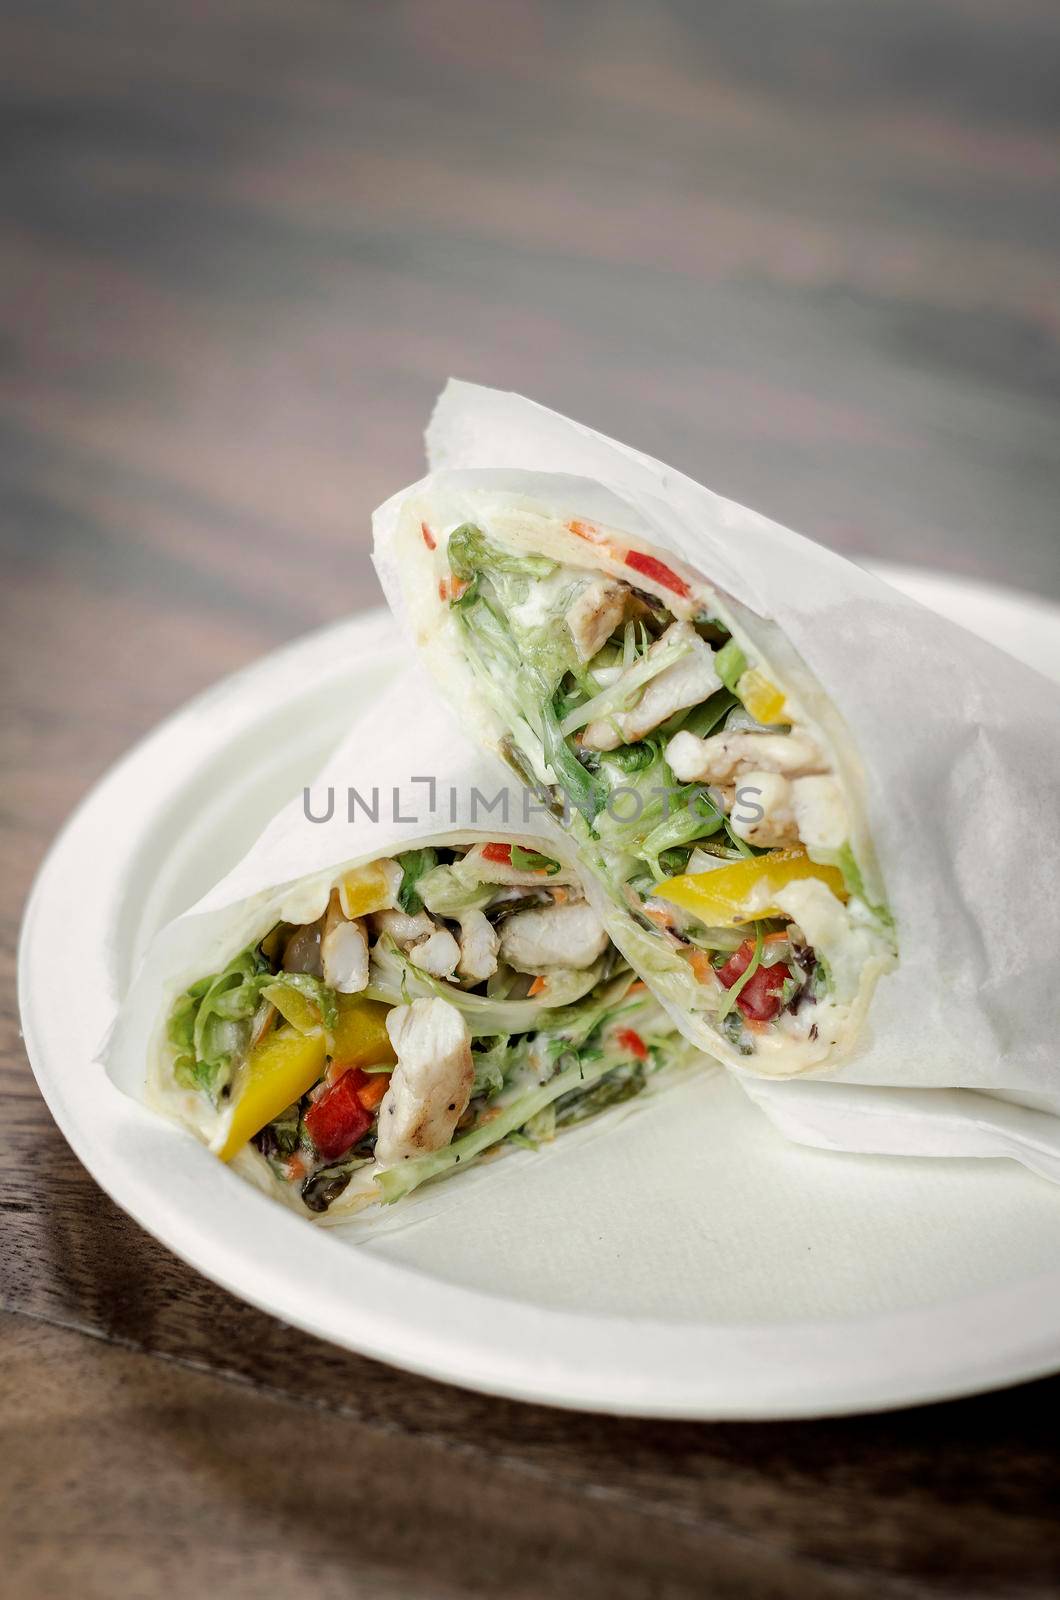 chicken salad wrap in white paper on wood table background by jackmalipan